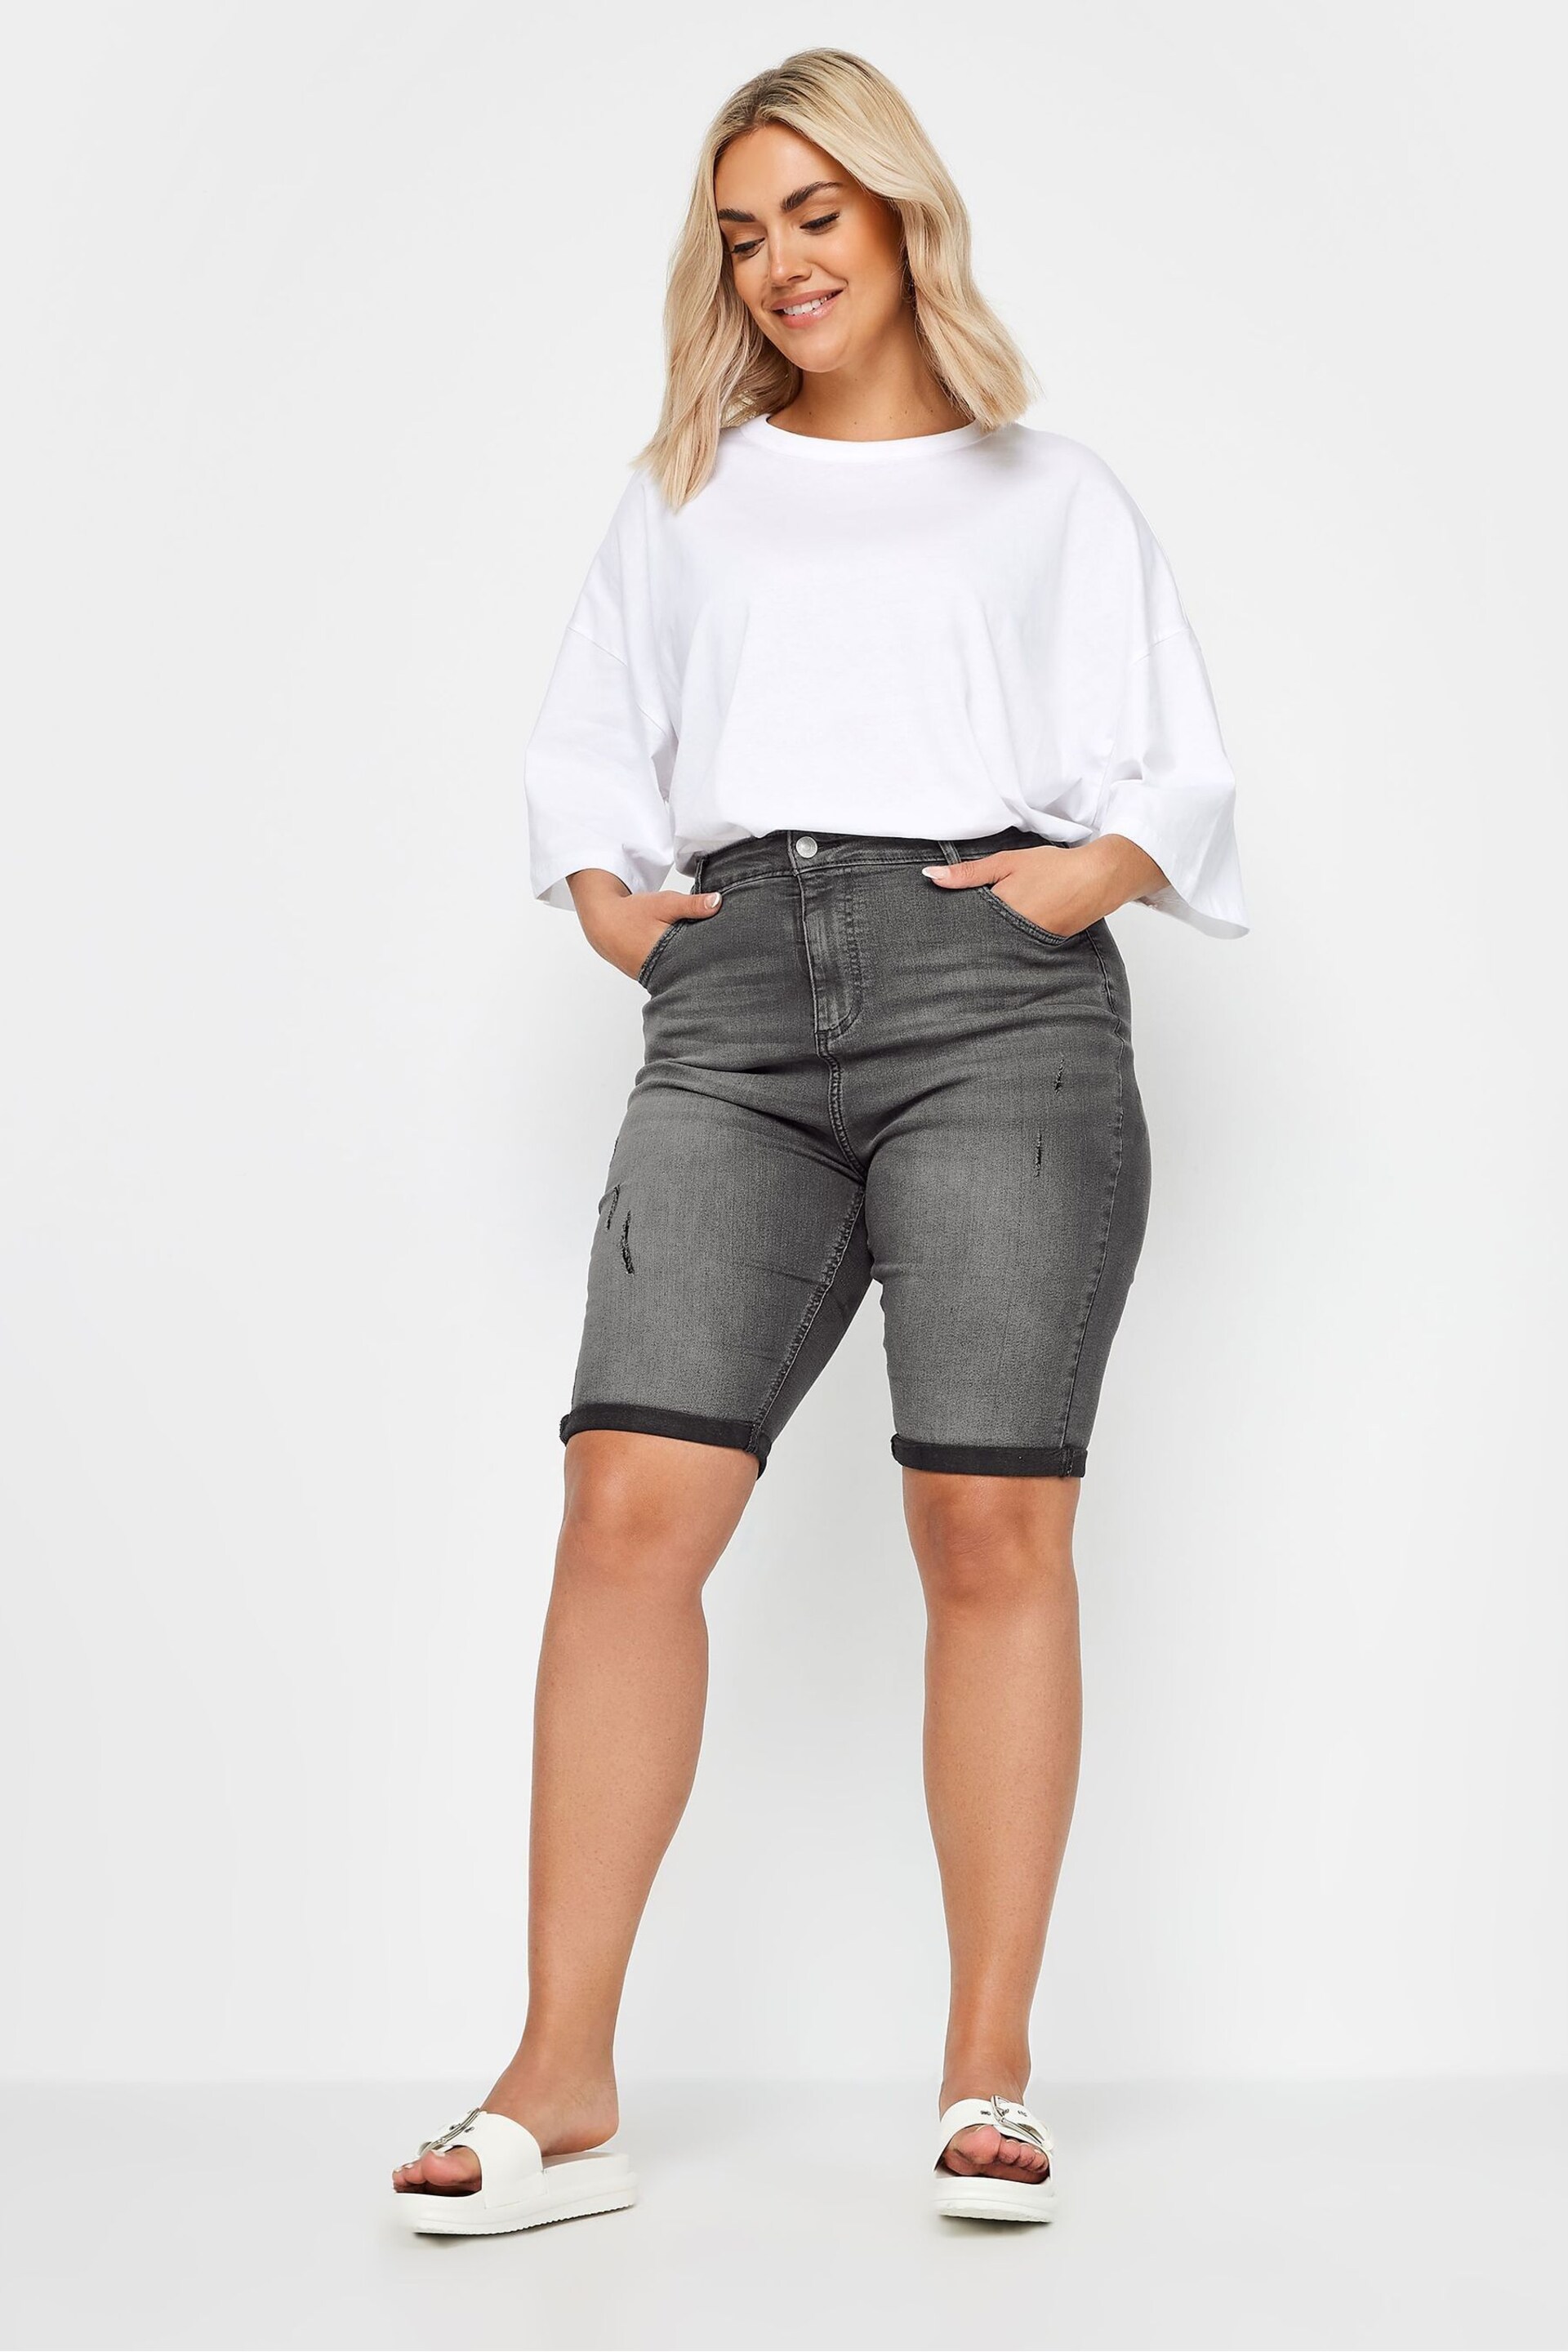 Yours Curve Grey Cat Scratch Denim Shorts - Image 2 of 5